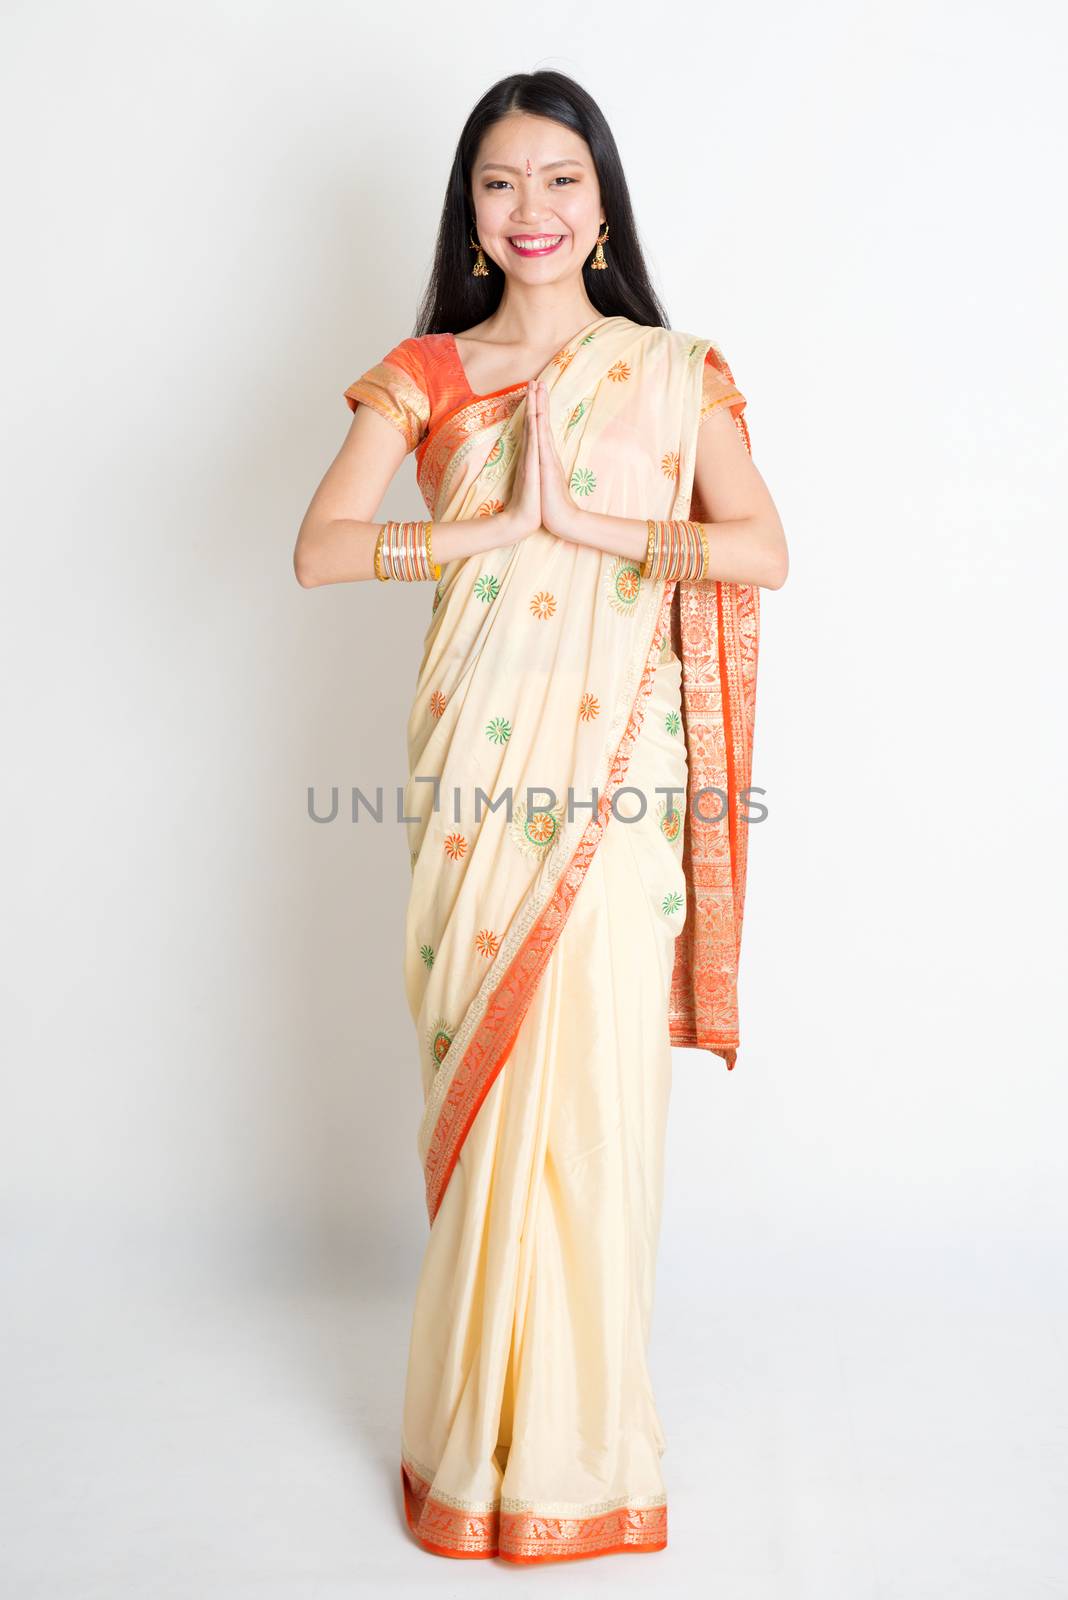 Full length mixed race Indian Chinese female with sari dress in greeting gesture, standing on plain background.